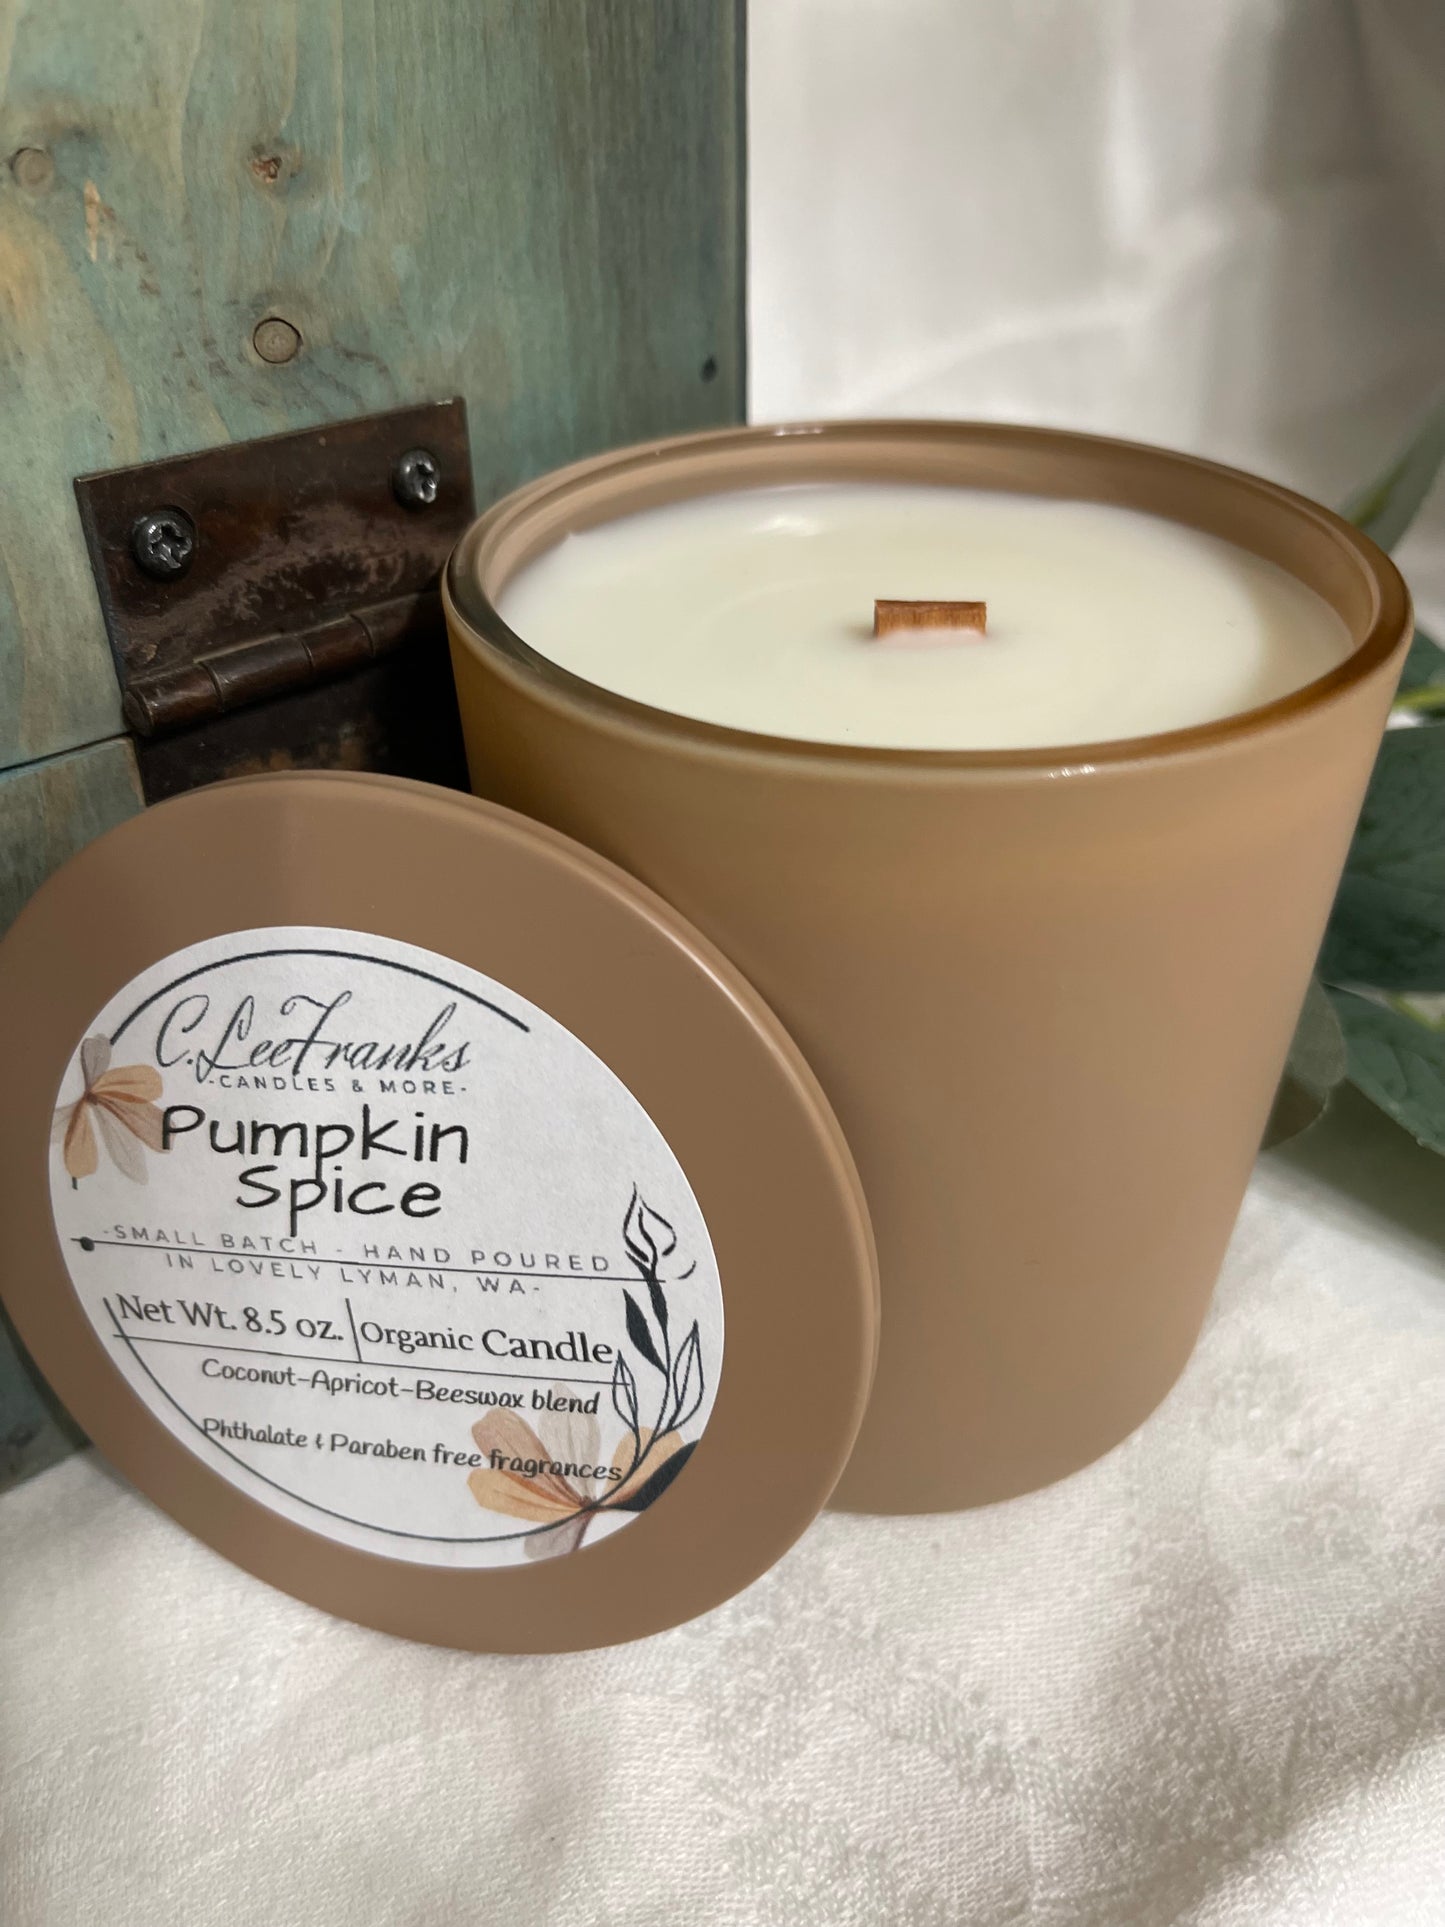 Fall Candles with wood wicks